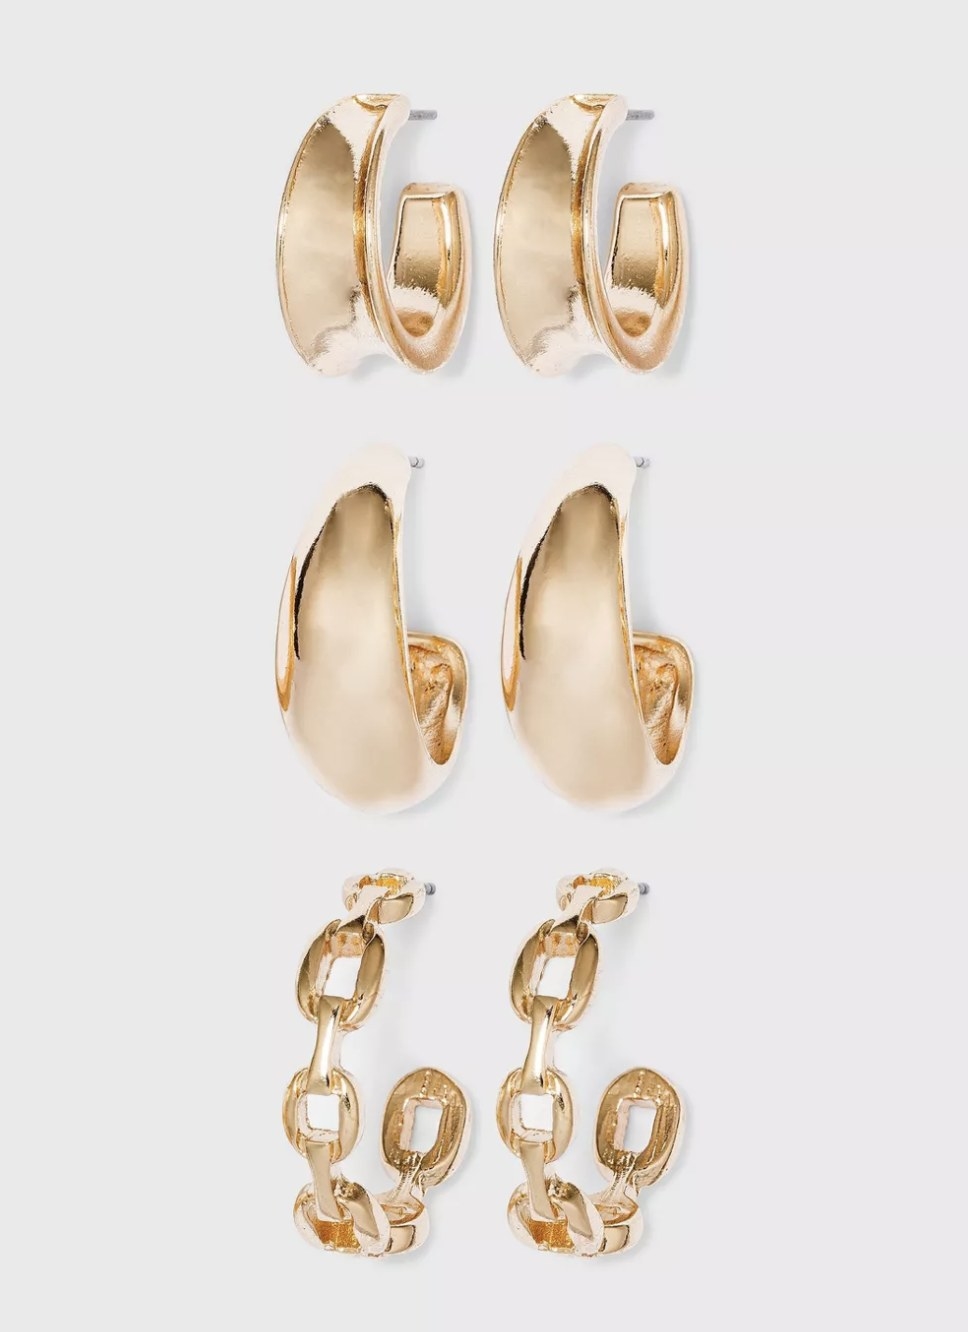 There are three pairs of gold earrings — two solid chunky hoops and one pair of chain hoops